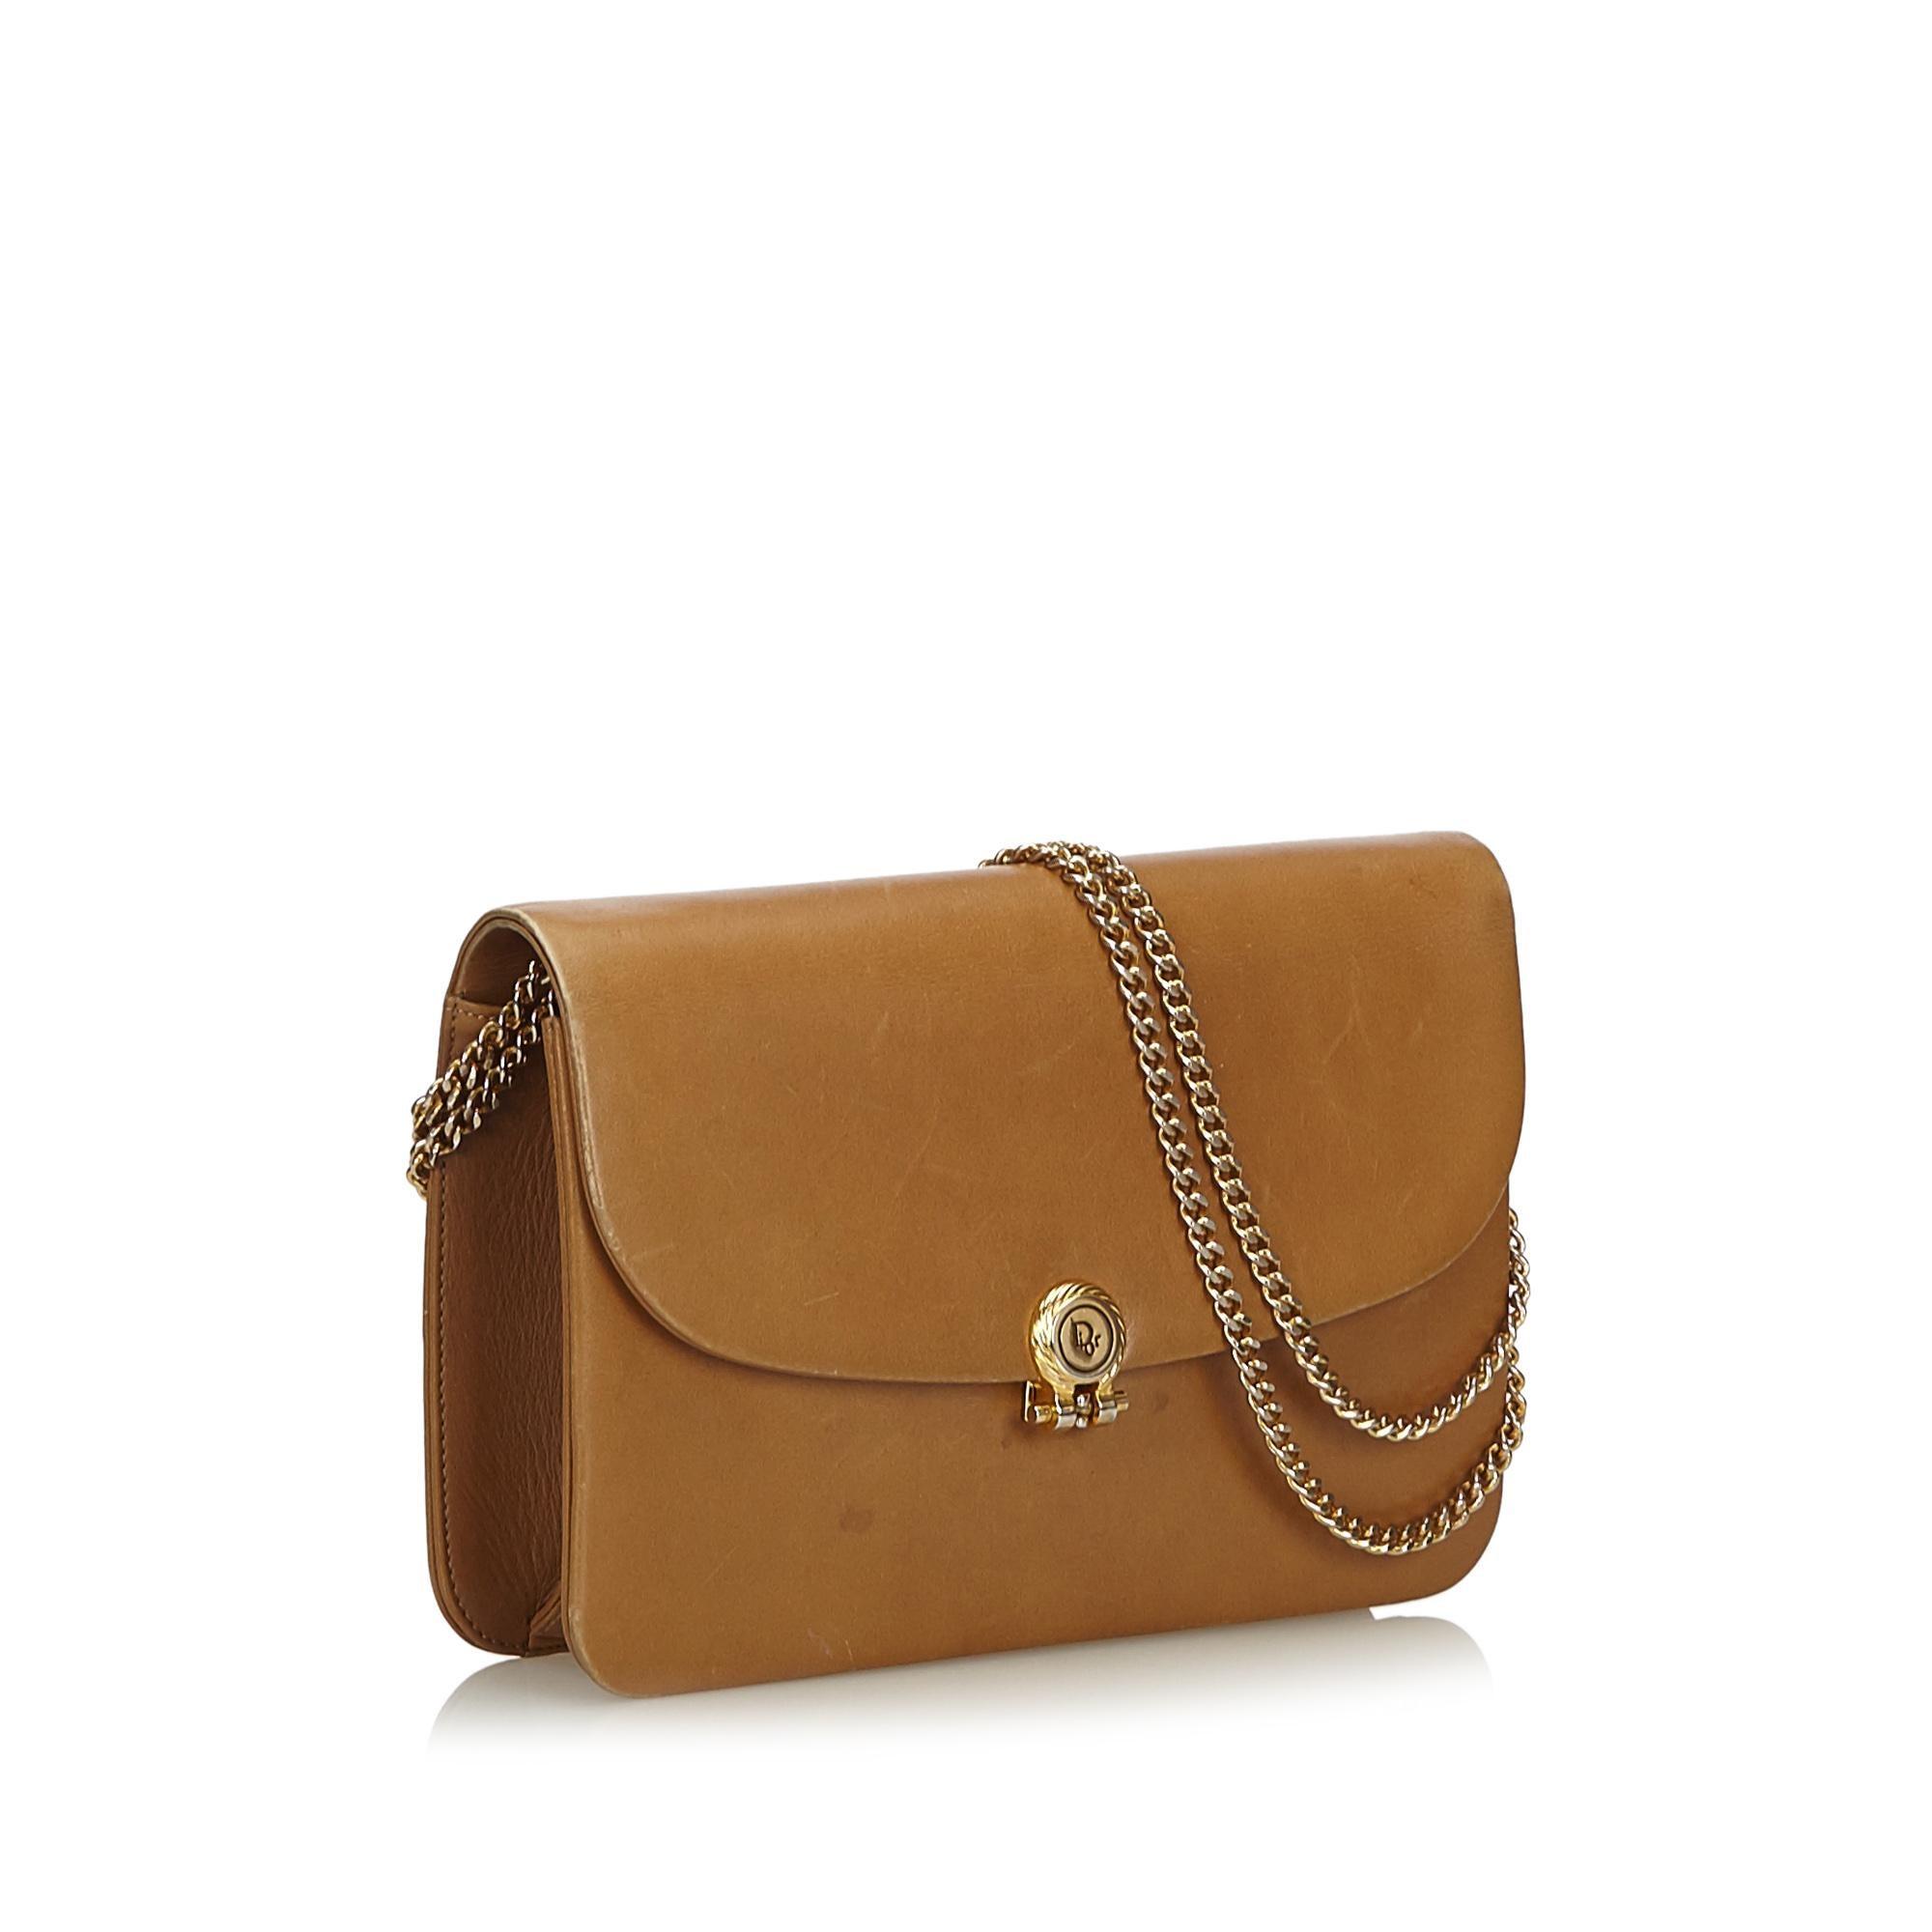 This crossbody bag features a leather body, a chain strap, and a top flap with a flip lock closure, and interior slip pocket. It carries as B condition rating.

Inclusions: 
This item does not come with inclusions.

Dimensions:
Length: 16.00